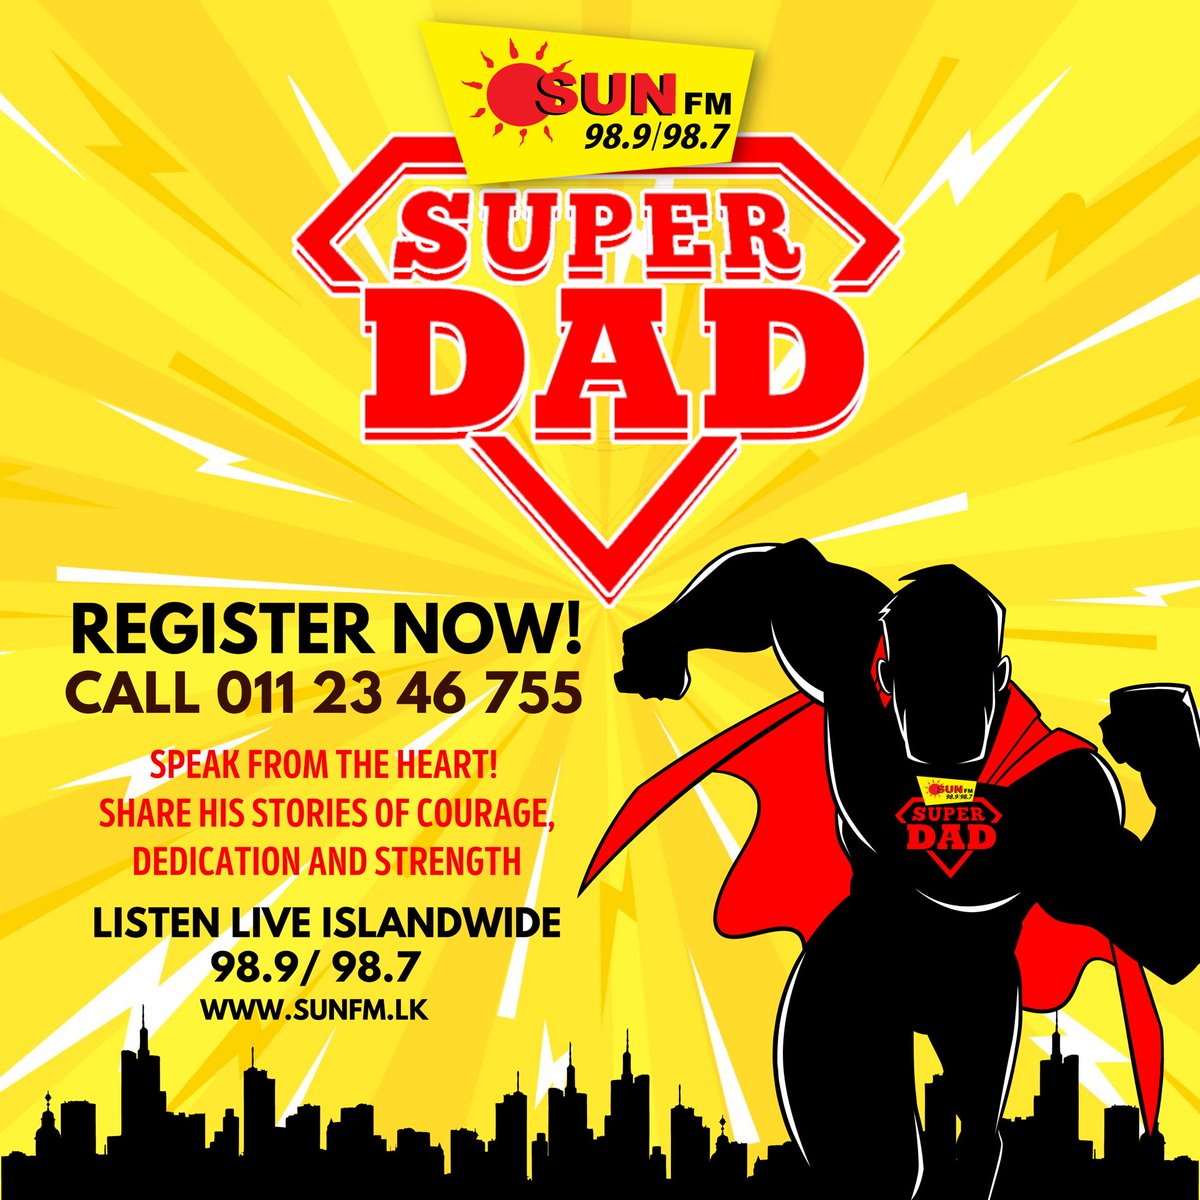 Any man can be a father, but it takes someone special to be a dad 🦸🏻‍♂️❤️☀️
Show your father some love by nominating him for the Sun FM Super Dad 2023
Make this Father’s Day a special one by letting your dad know how much he means to you ❤️
#SunFM #SuperDad2023 #FatherDay2023